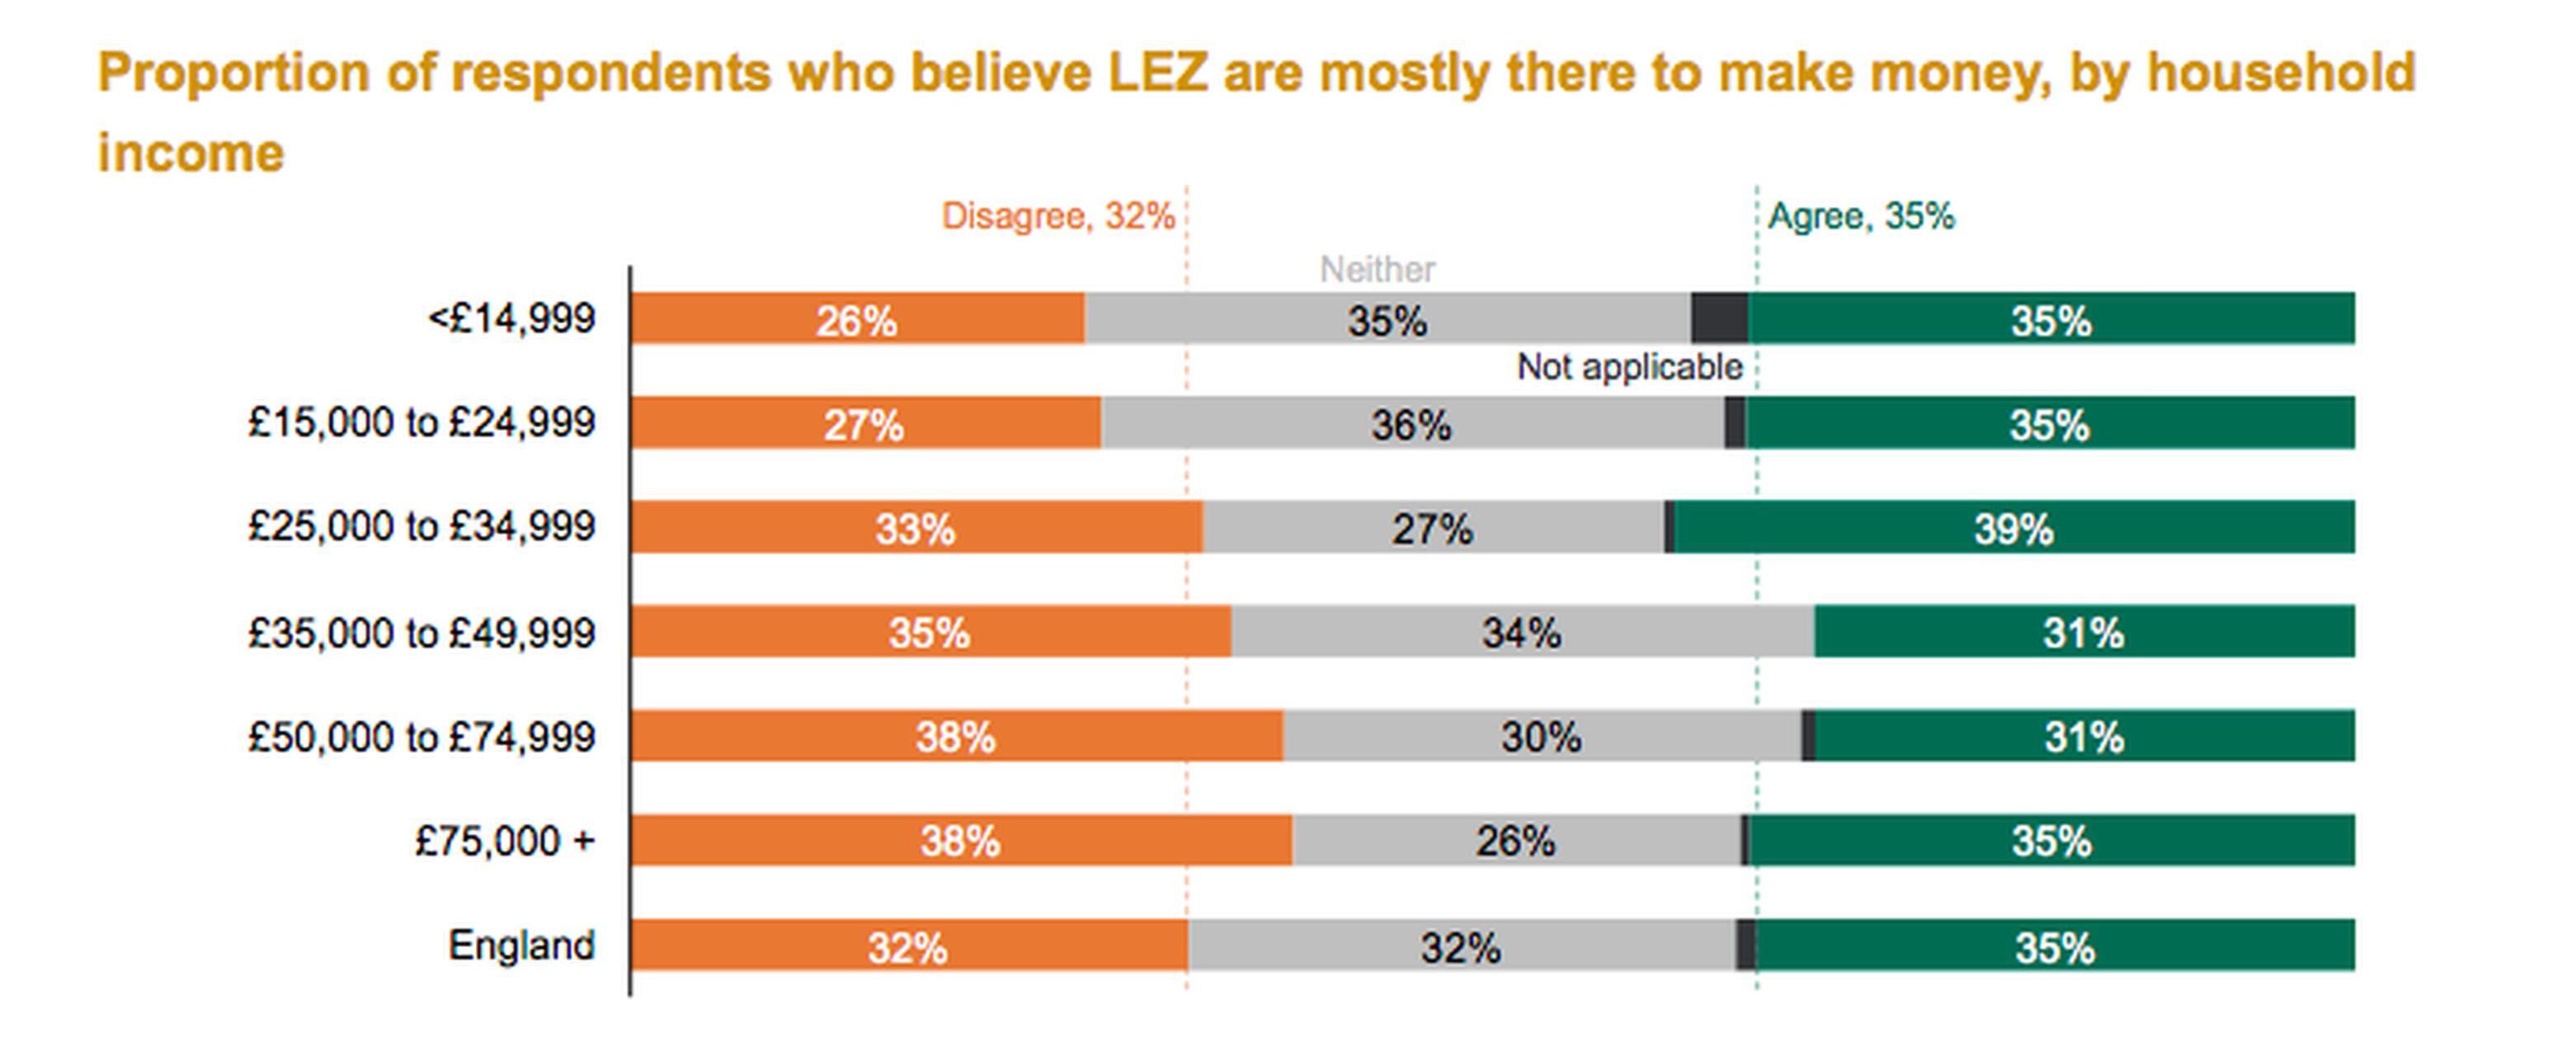 The DfT’s National Travel Attitudes Study: Wave 2 indicates that around 61% of respondents said they were in favour of Low Emissions Zones (LEZ),